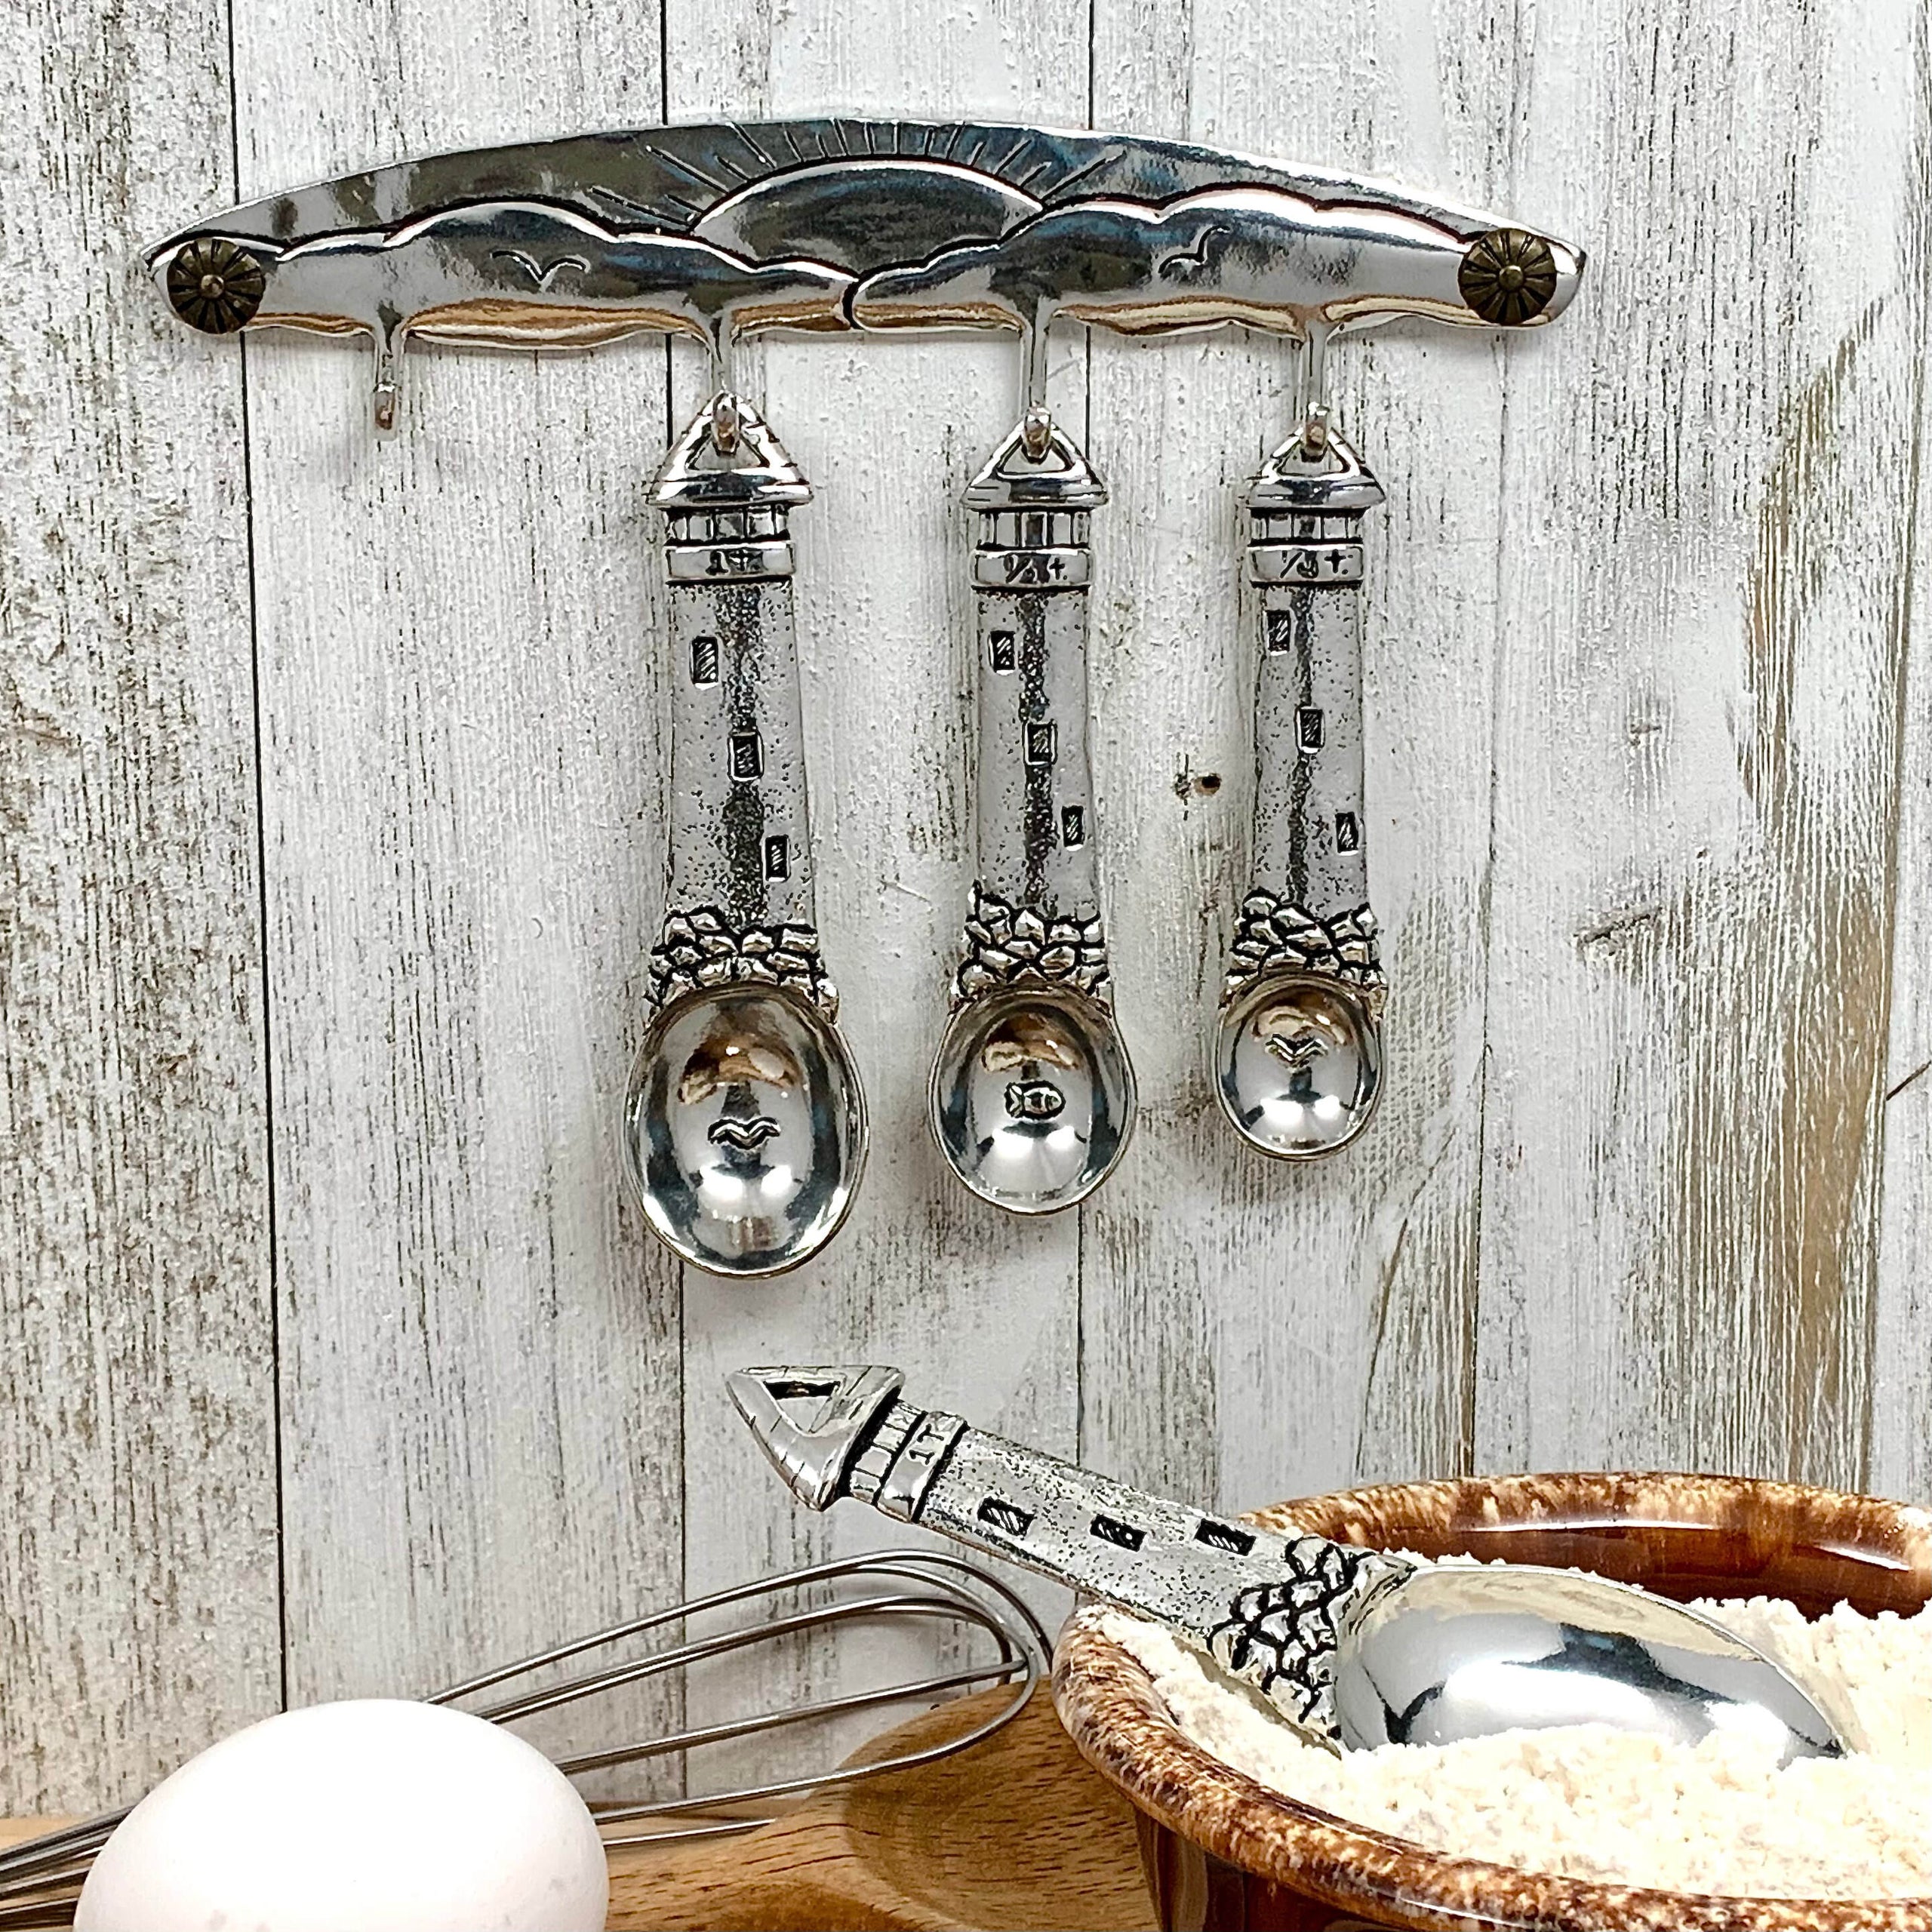 Decorative Measuring Spoons for Sale in Schaumburg, IL - OfferUp